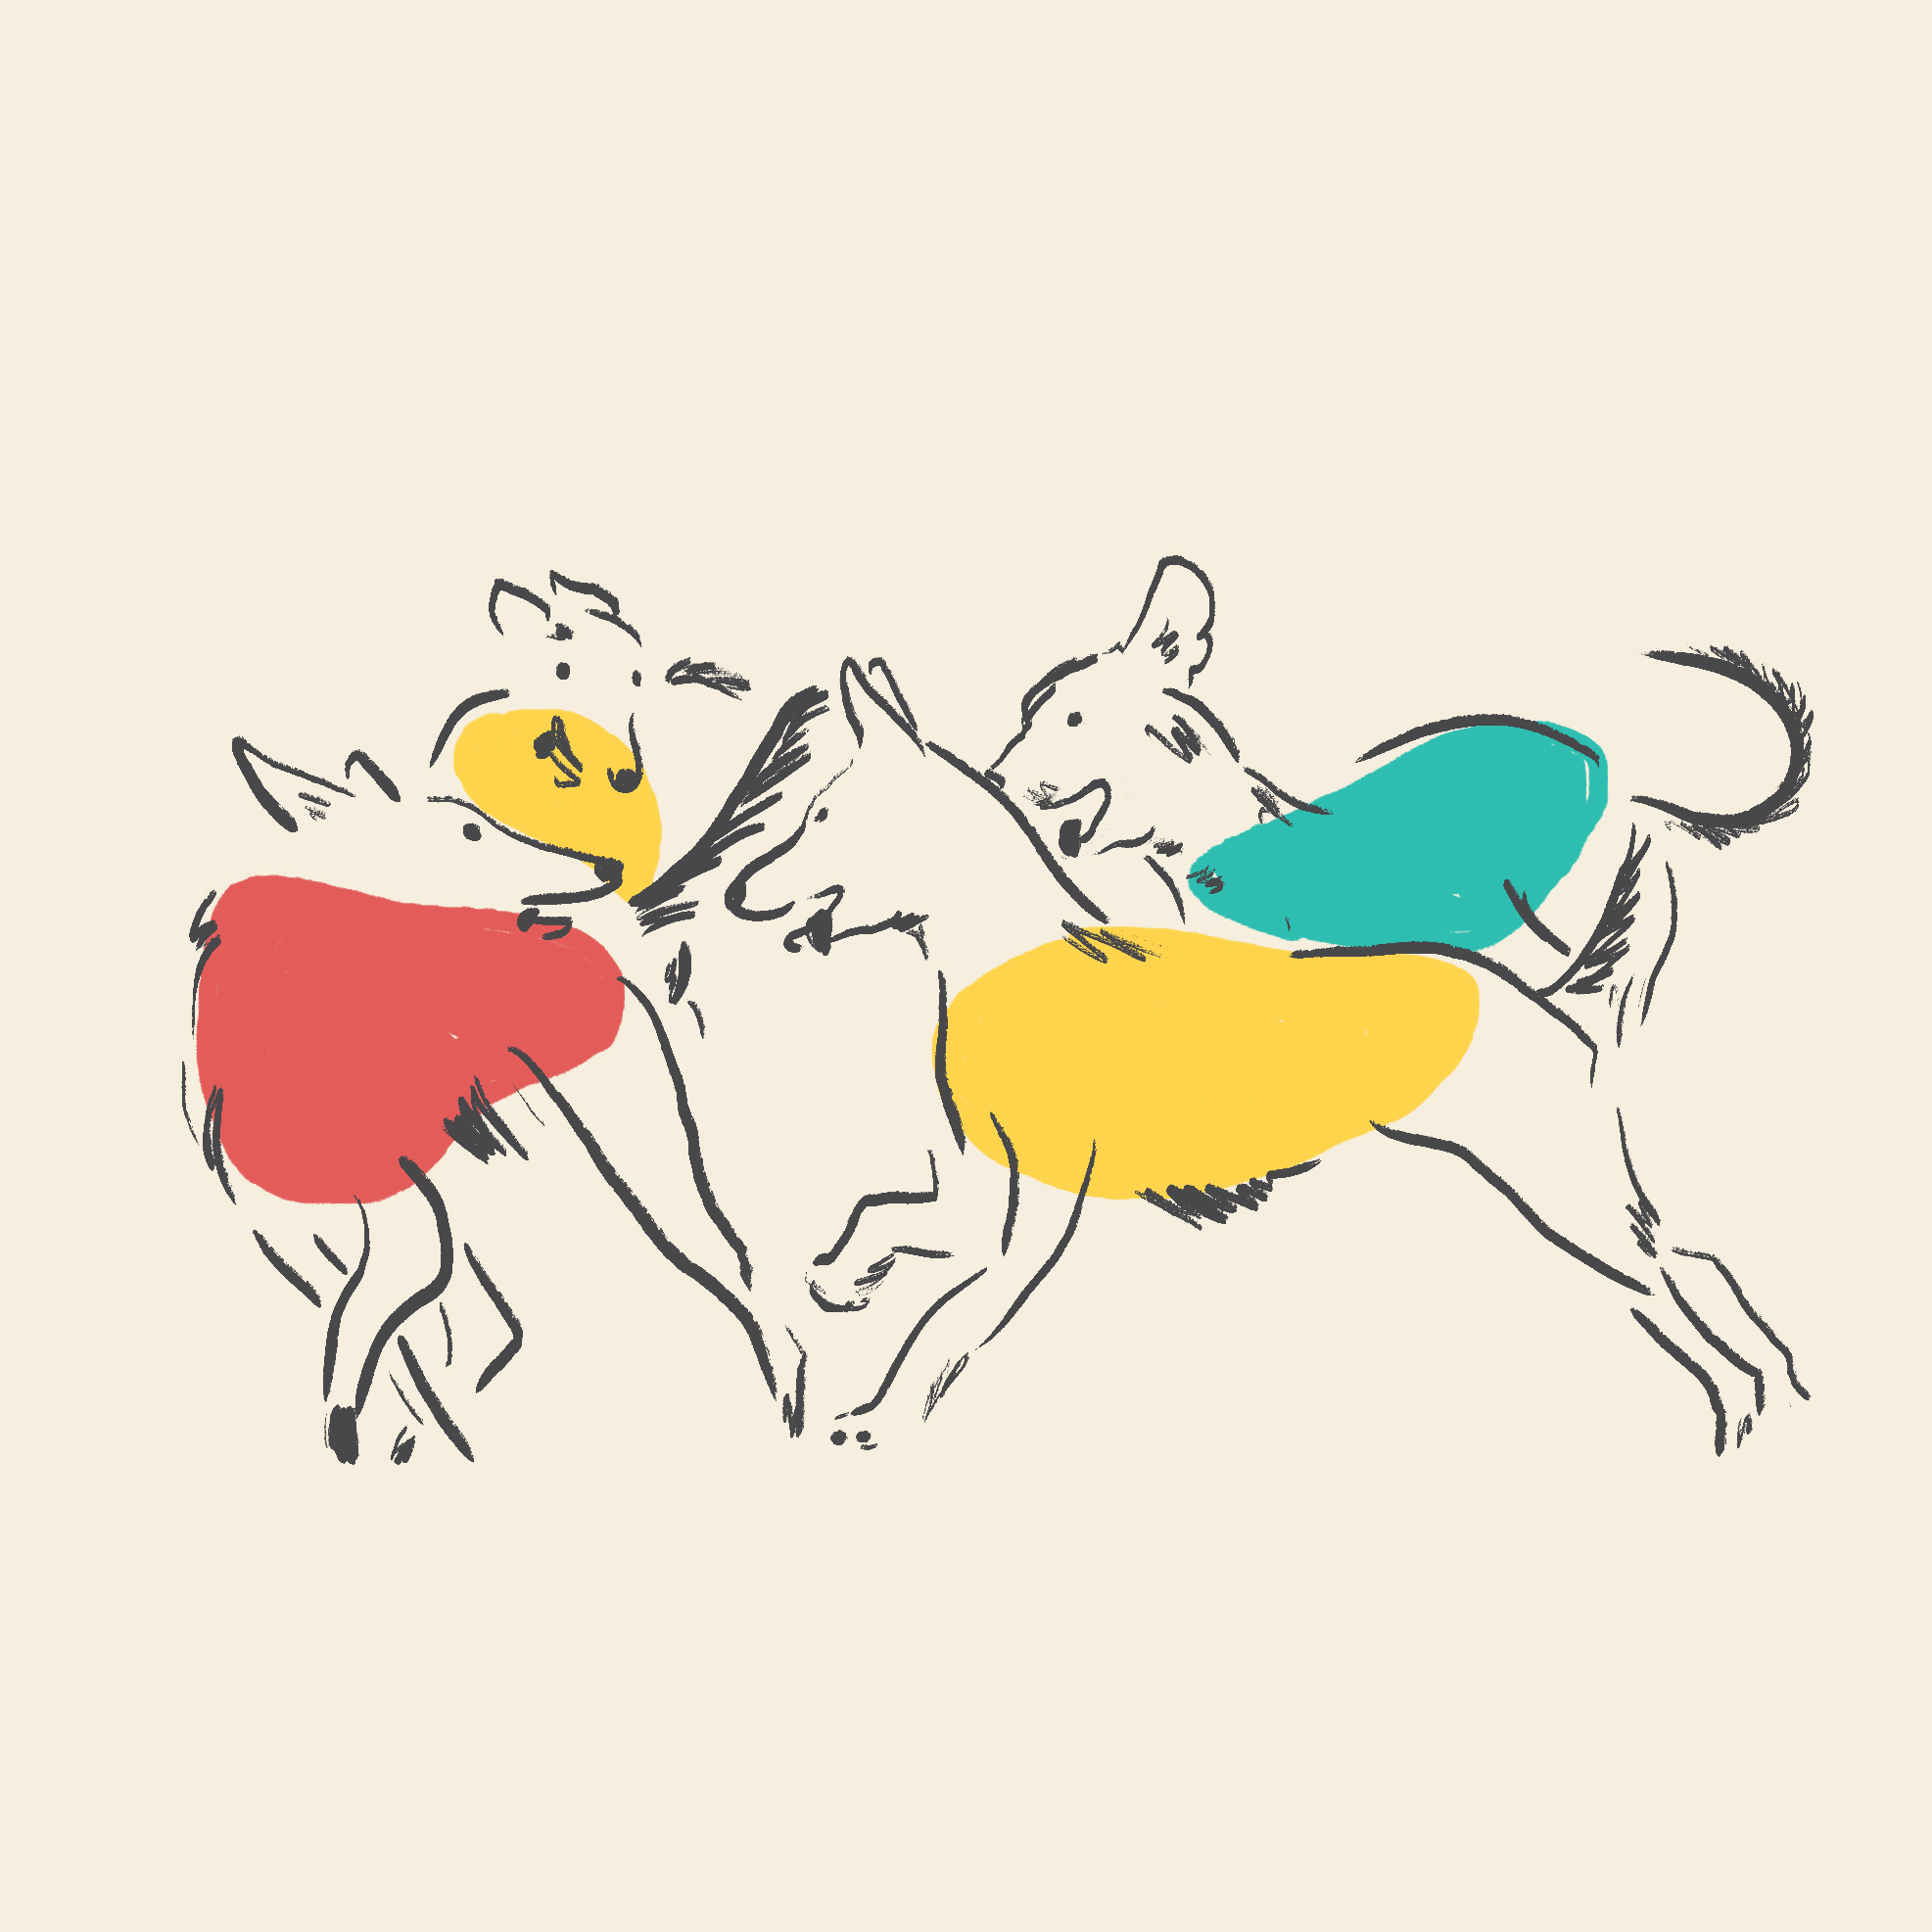 Dogs chasing one another - concept illustration